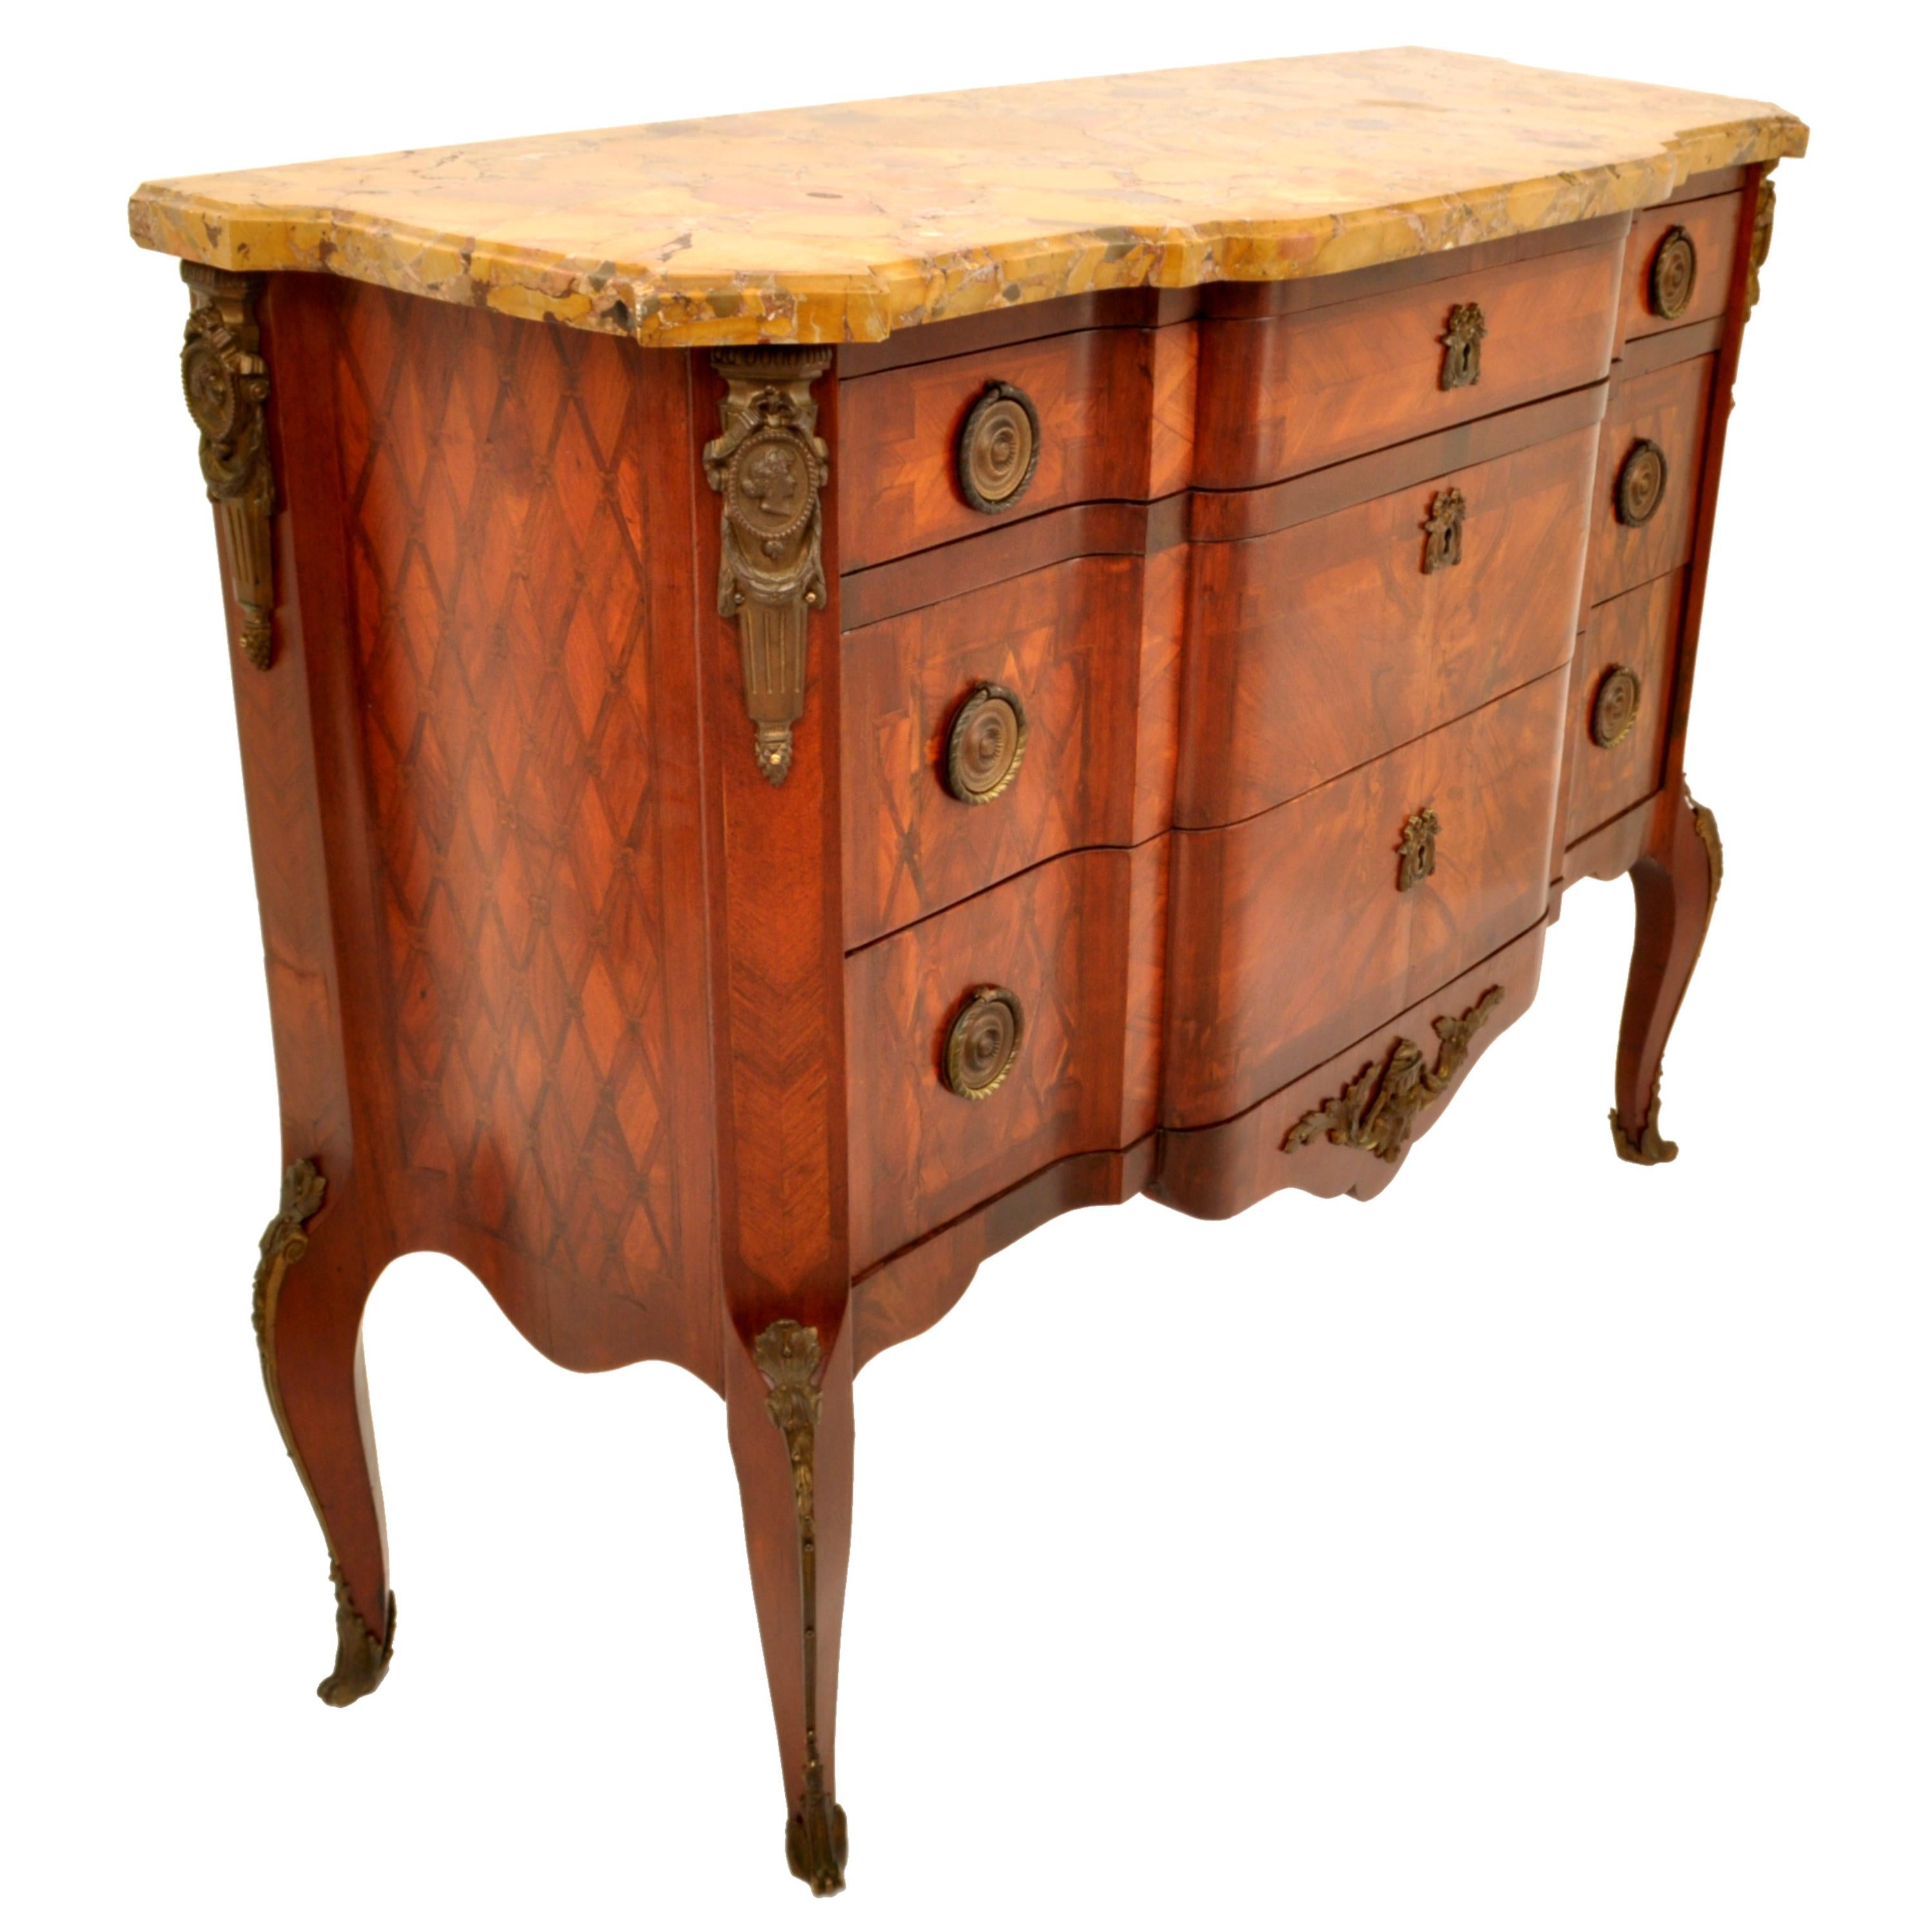 A very fine period antique French Louis XV/XVI inlaid walnut & marble top & ormolu mounted commode/chest, circa 1780.
The commode having the original Breccia specimen marble top, the commode of breakfront form and having three graduated drawers,